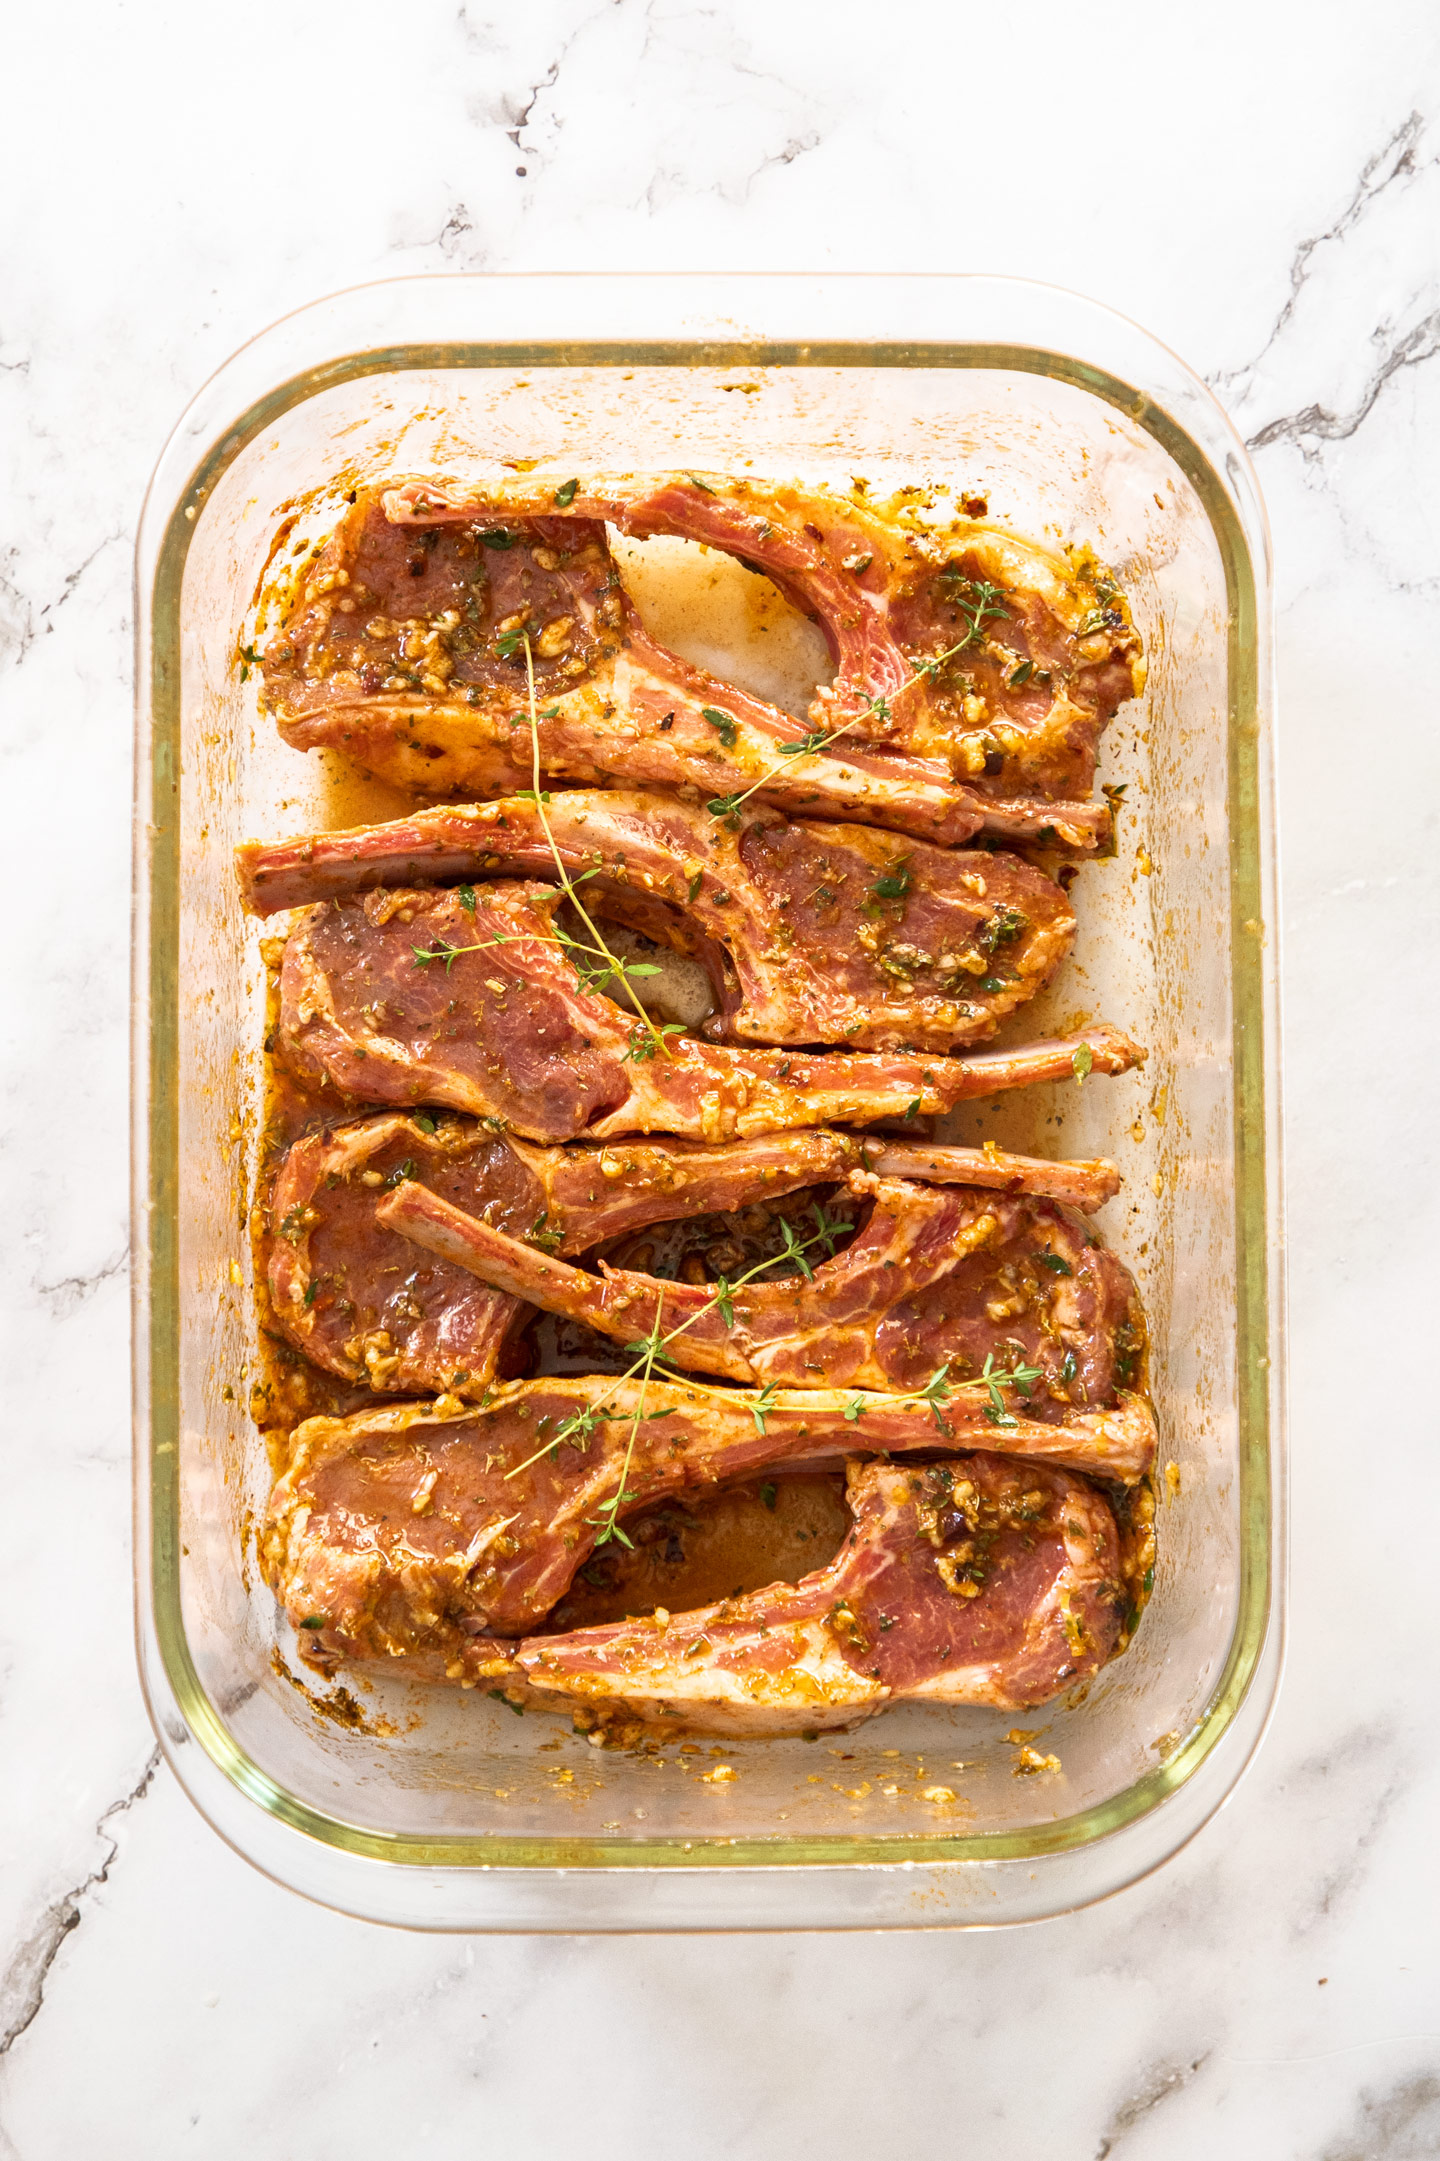 8 lamb chops covered in marinade in a glass dish.